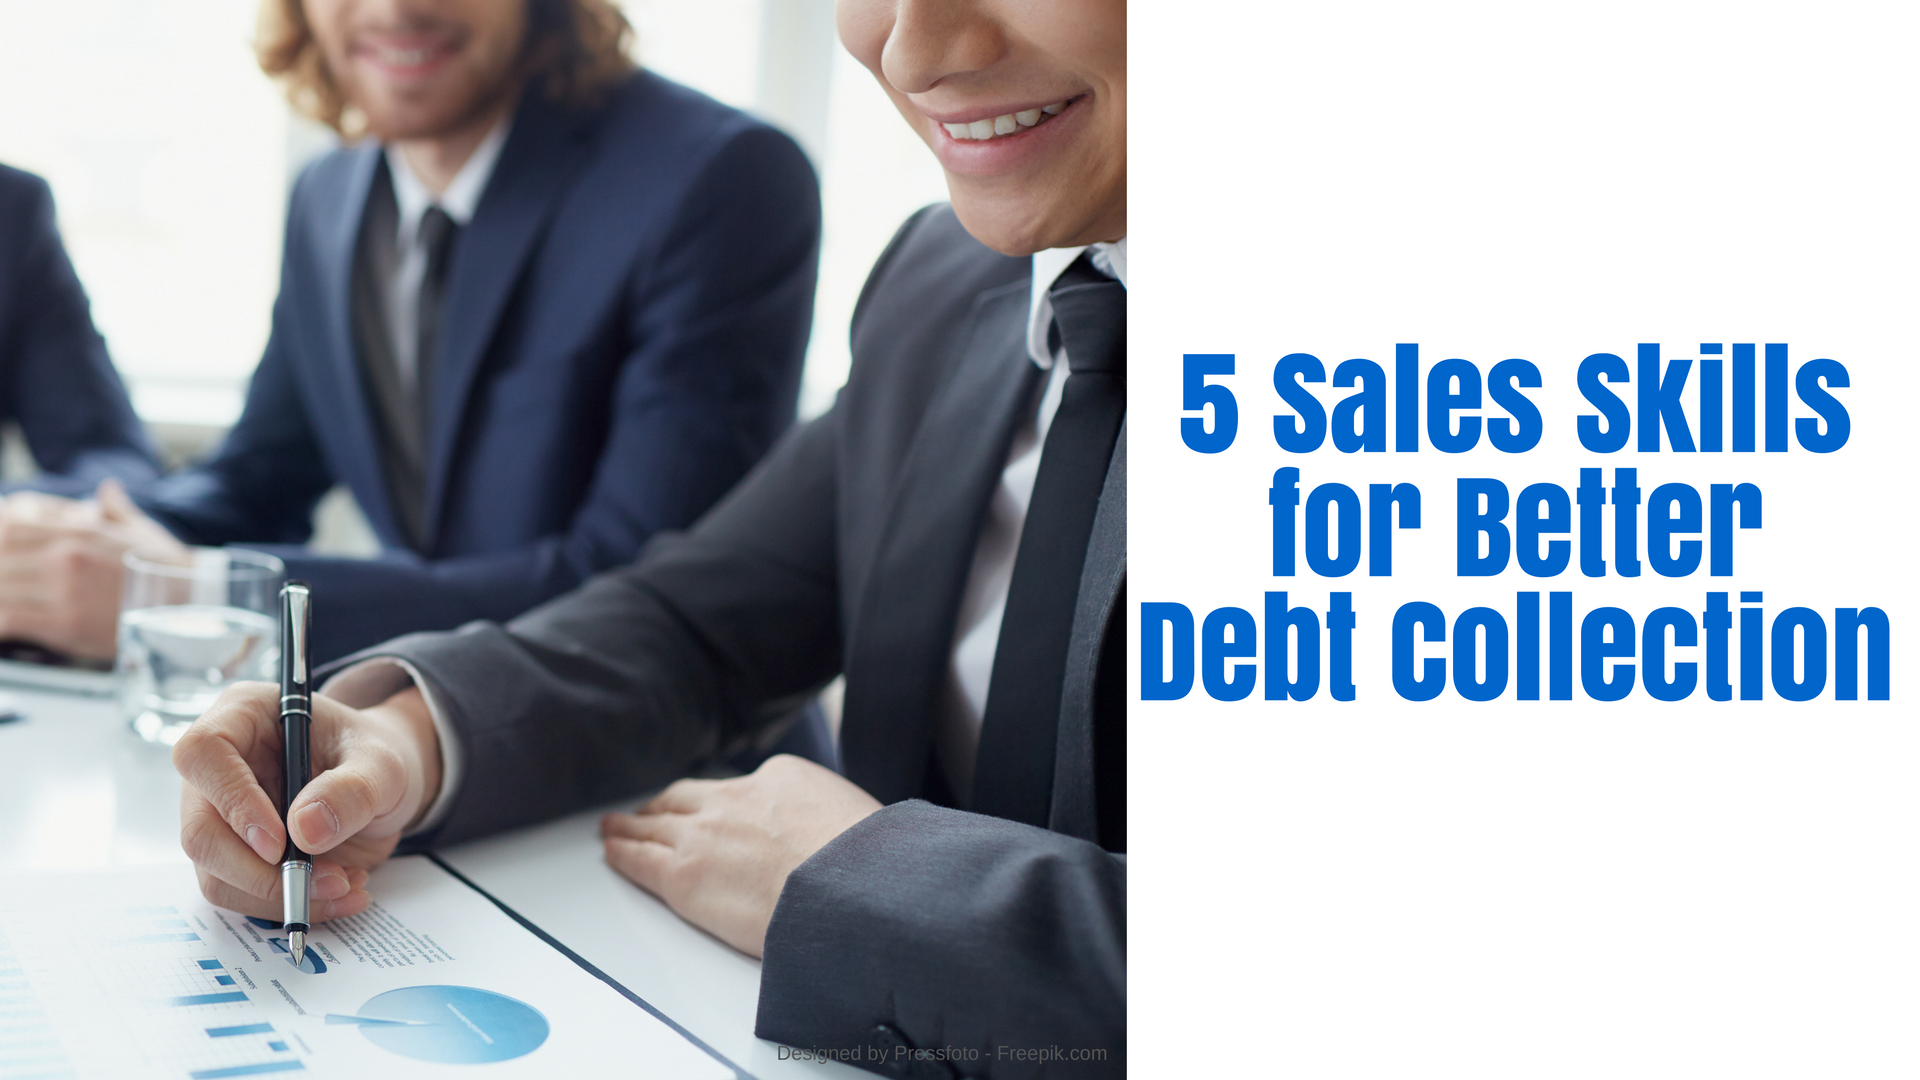 5 Sales Skills for Better Debt Collection